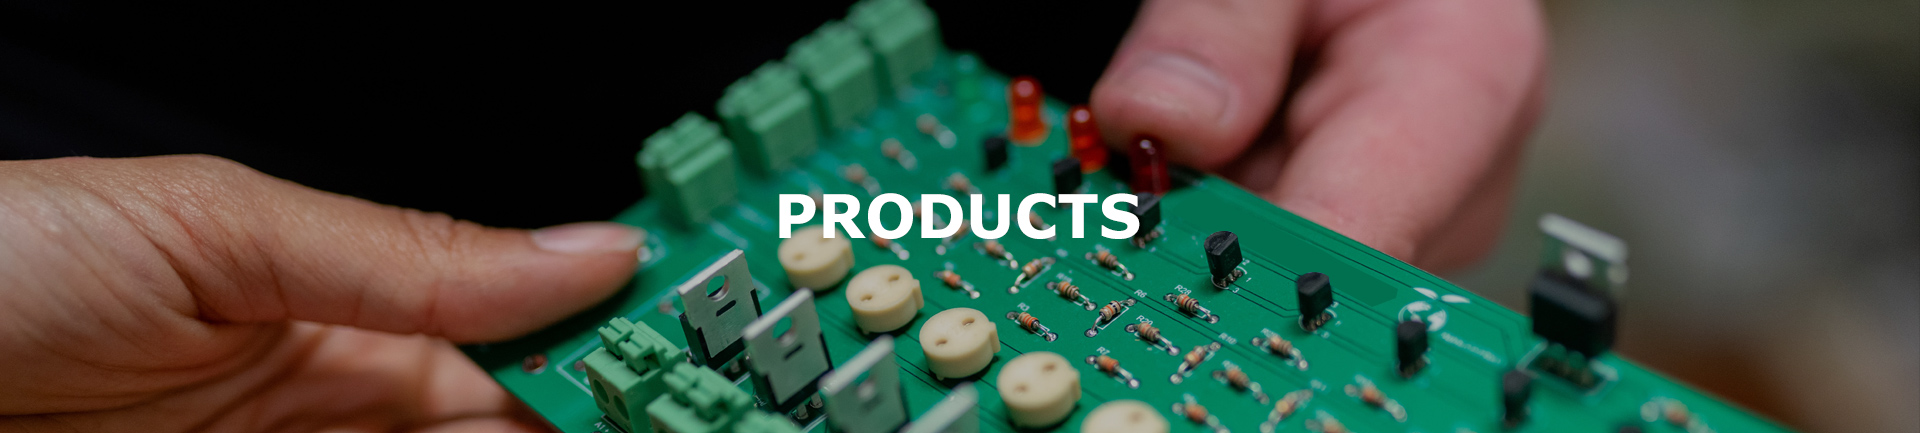 Multilayer Circuit Board | Products | BNX